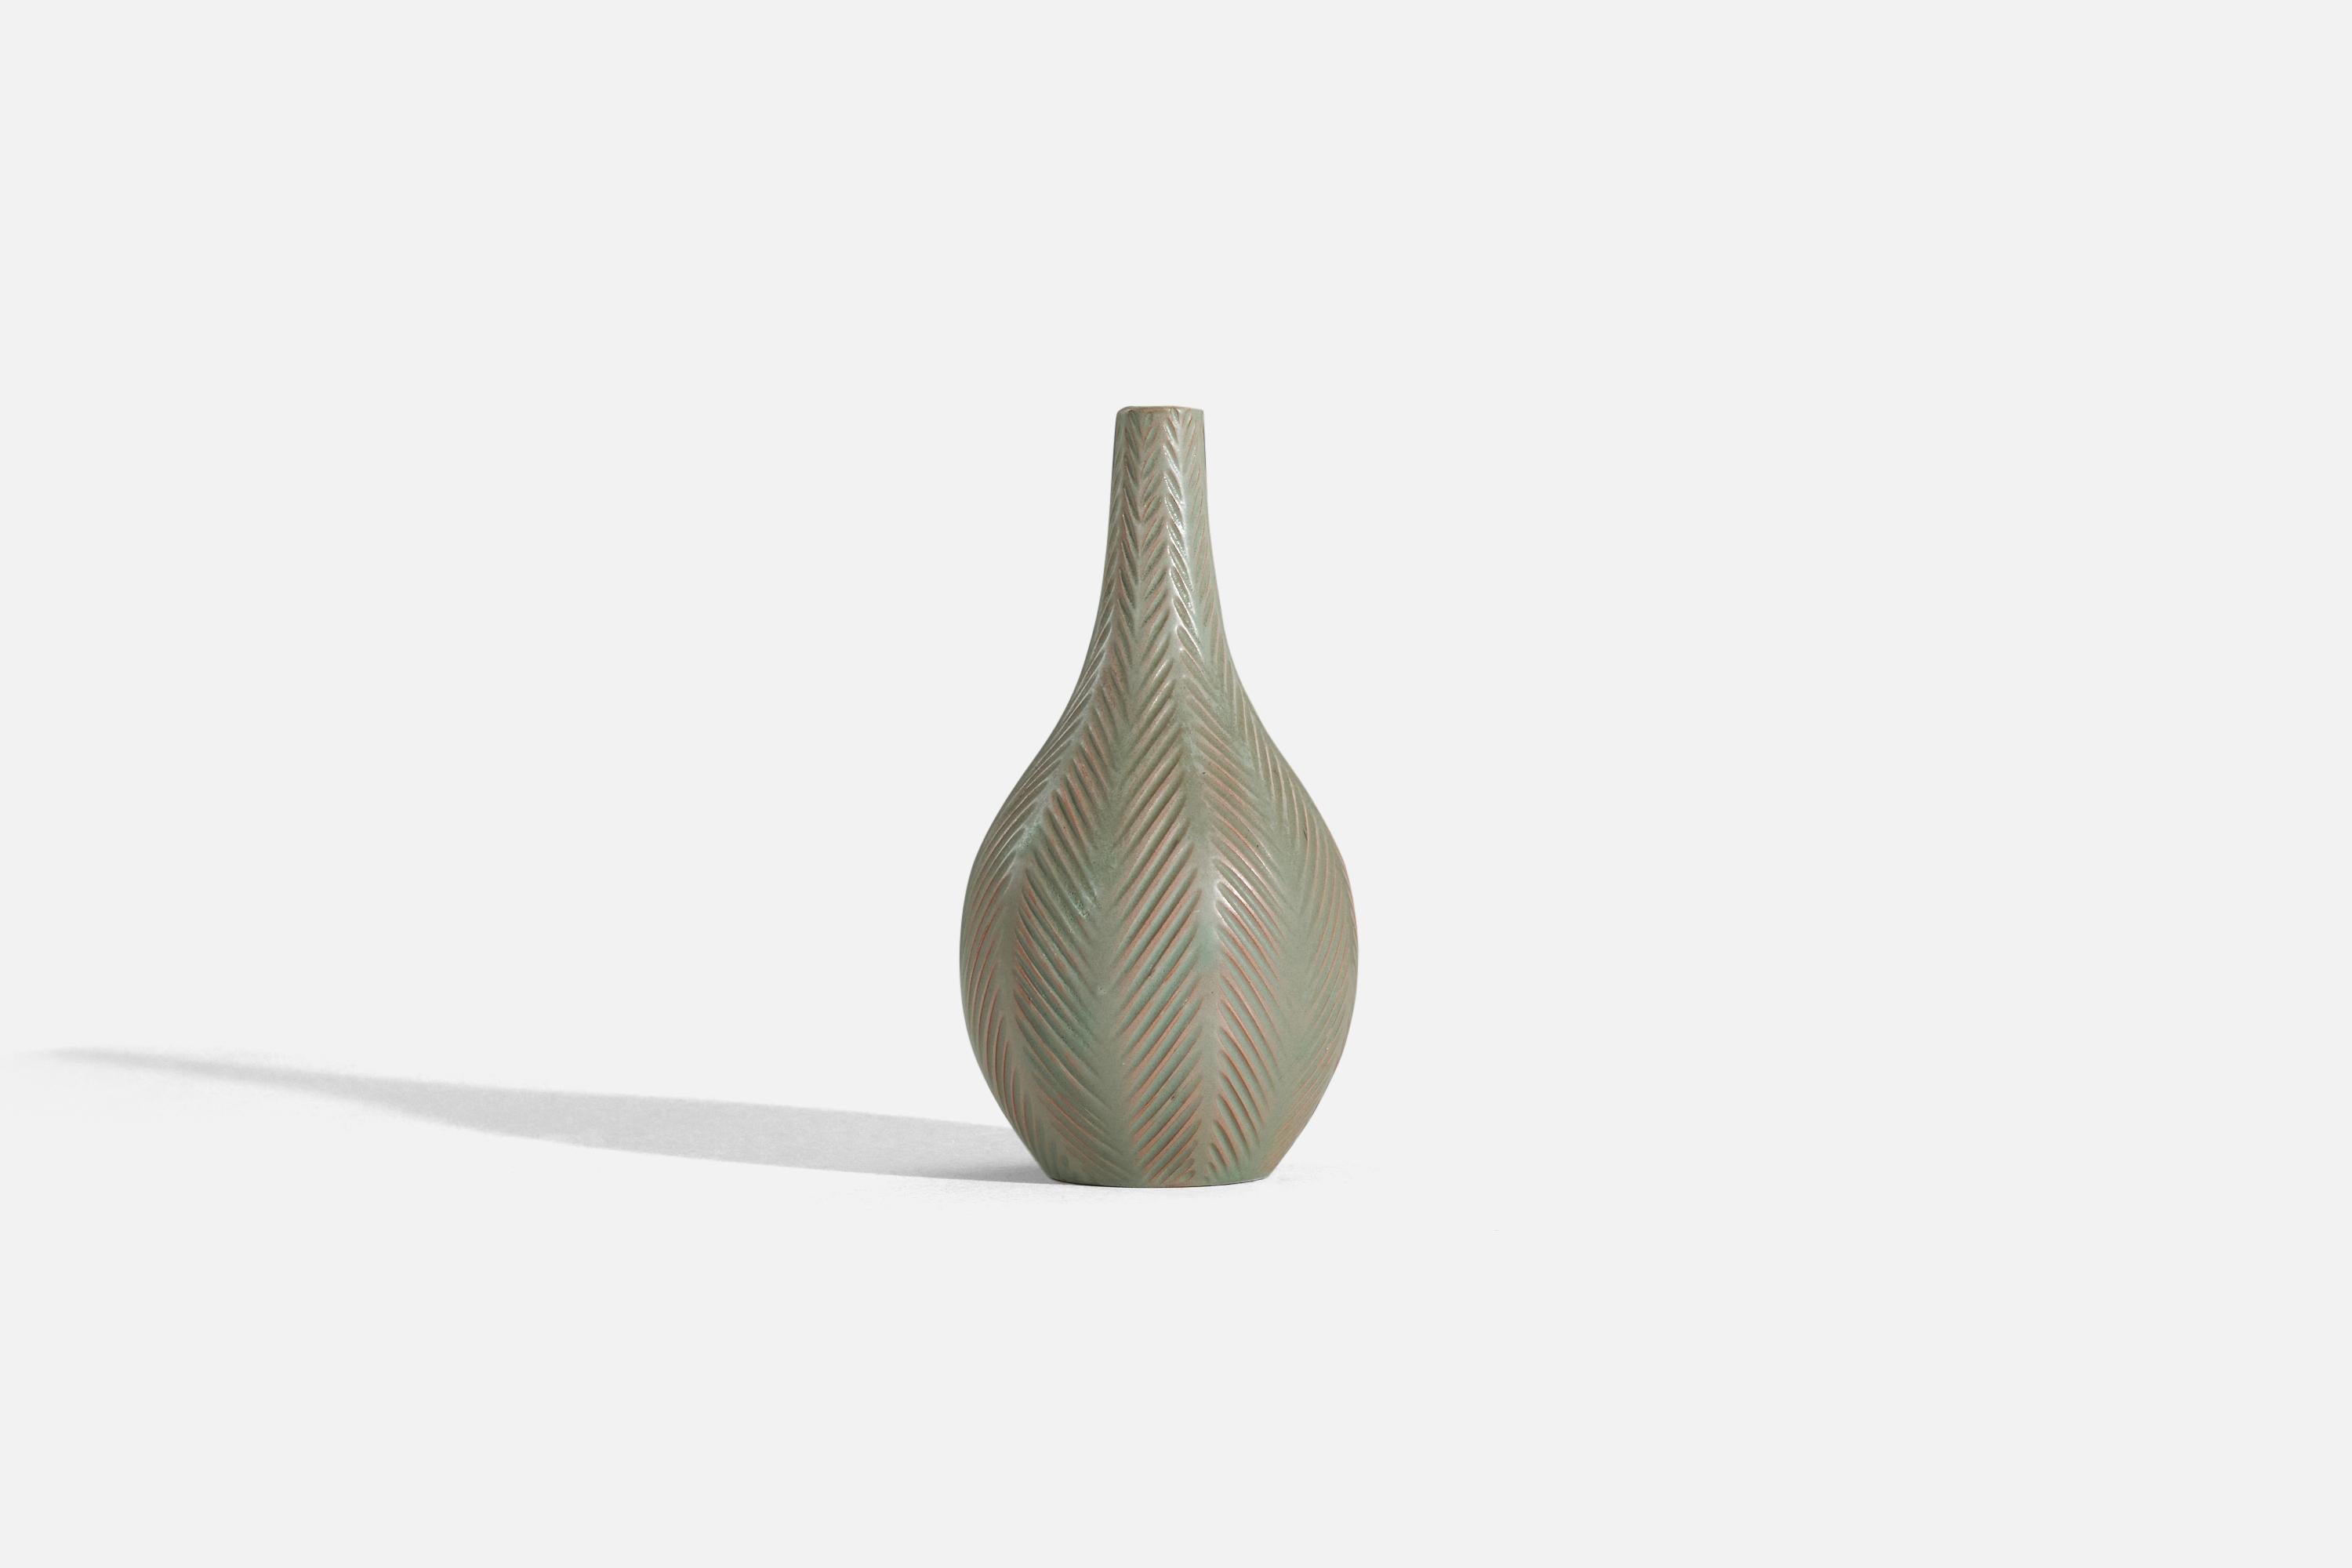 A green-glazed earthenware vase designed by Anna-Lisa Thomson and produced by Upsala-Ekeby, Sweden, 1940s. 
.